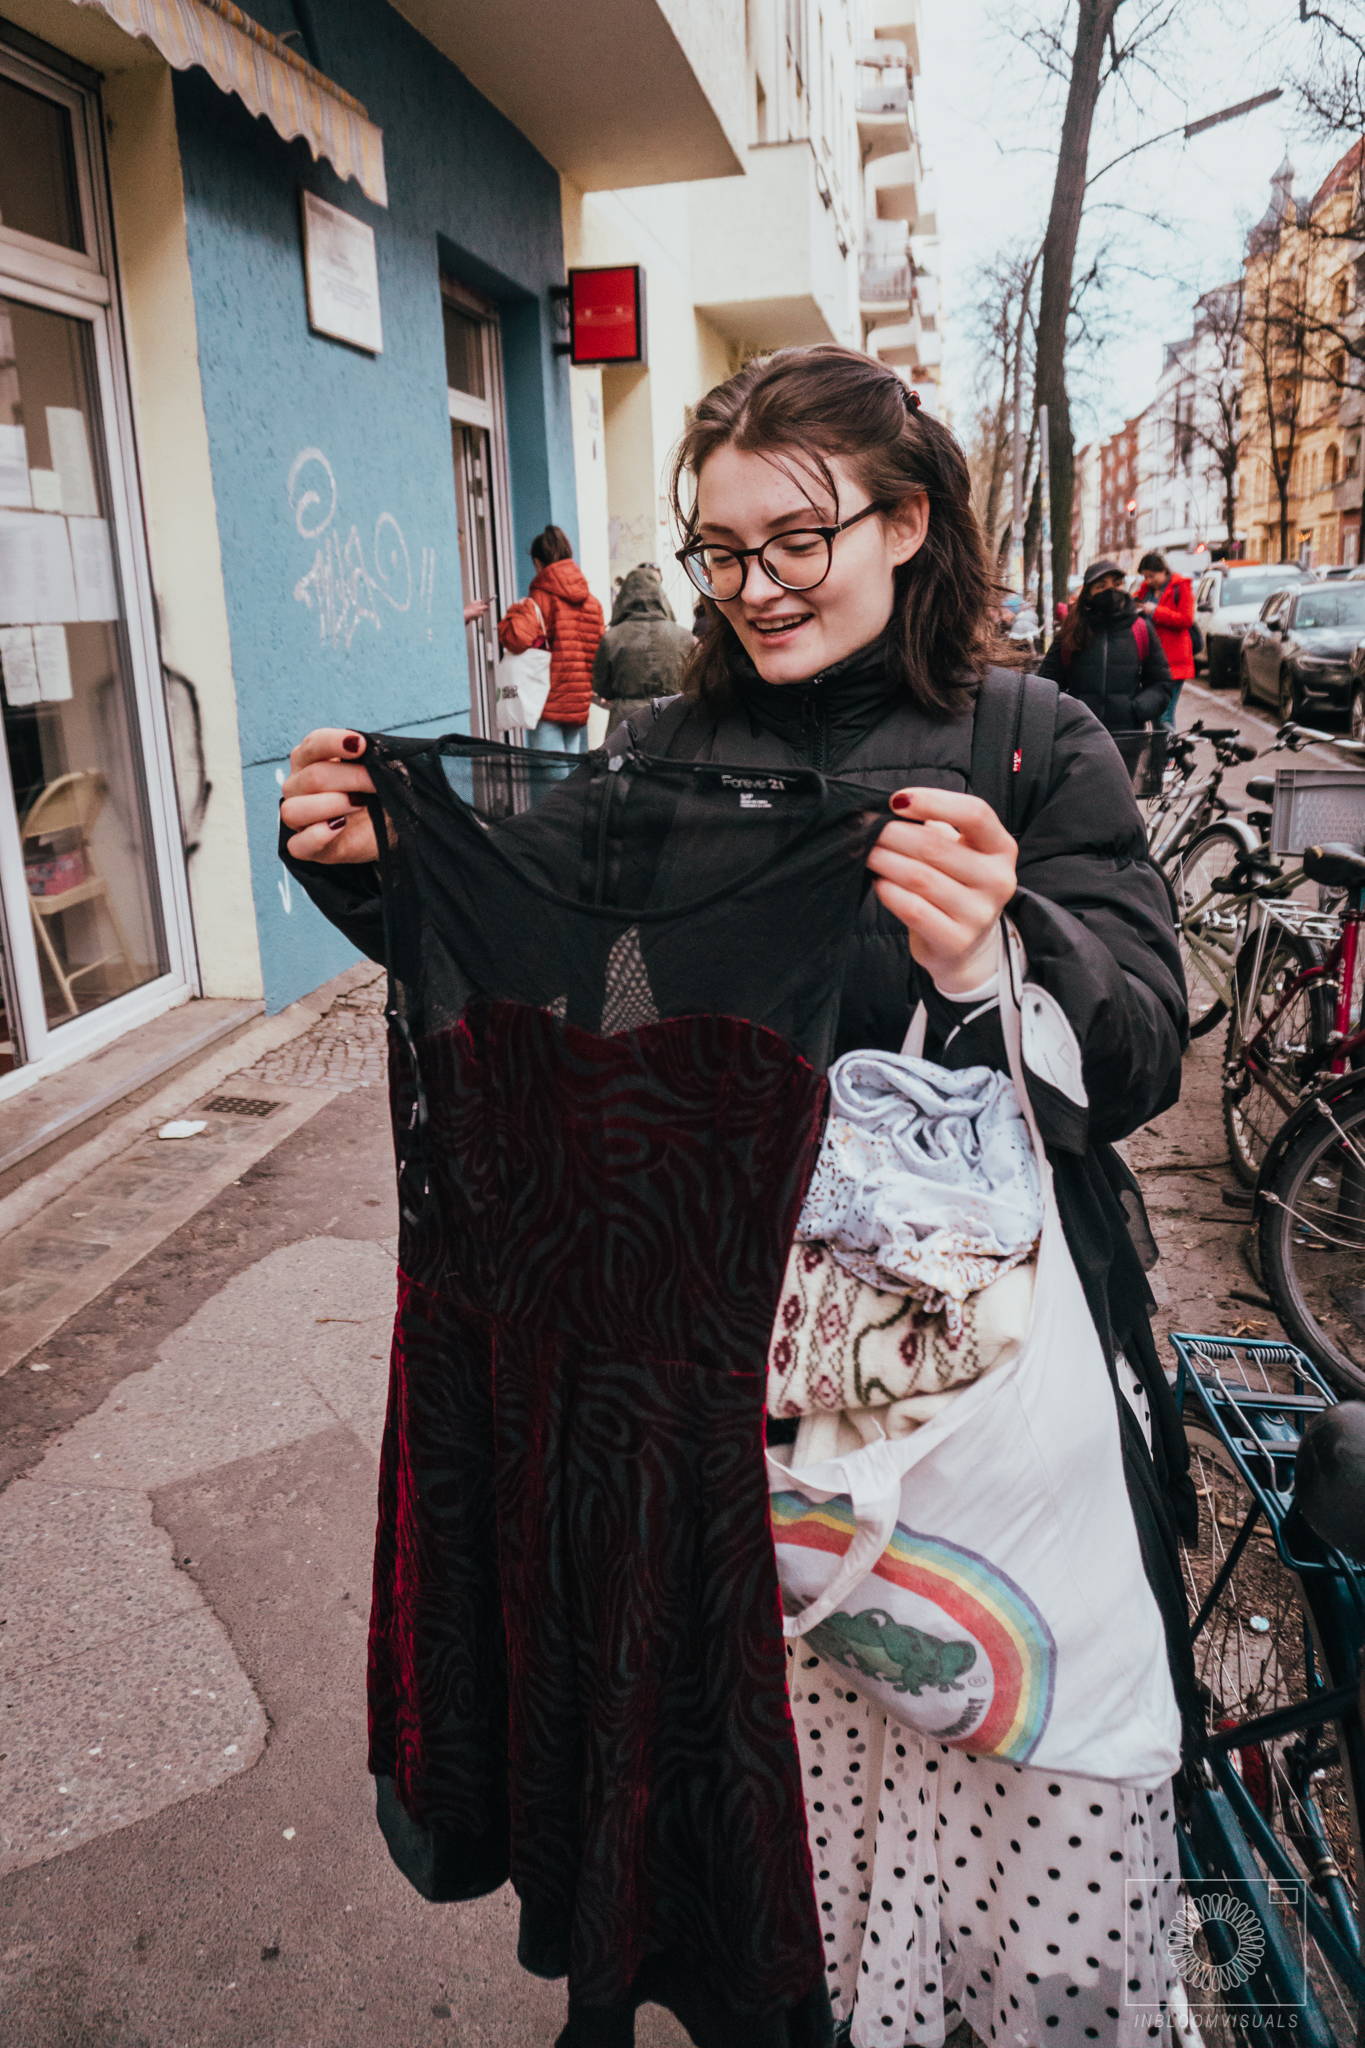 Berlin Clothing Swap launches swap events of second-hand clothes like thrift shops